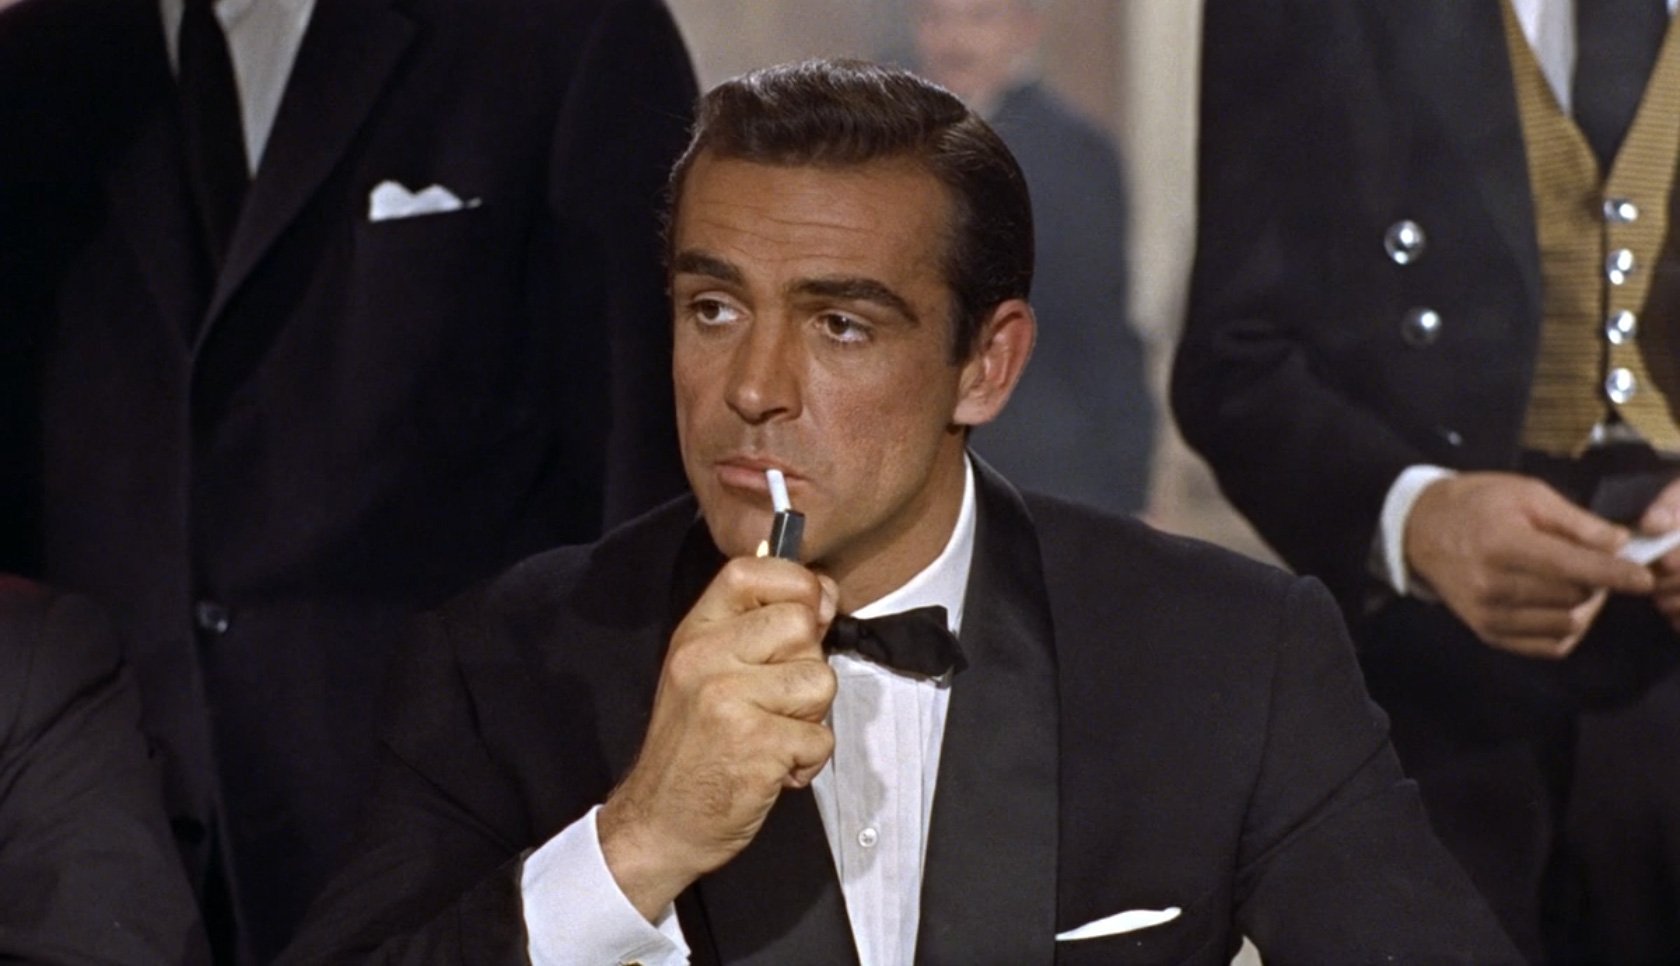 Sean Connery: James Bond actor dies aged 90. How he created the best Bond in history